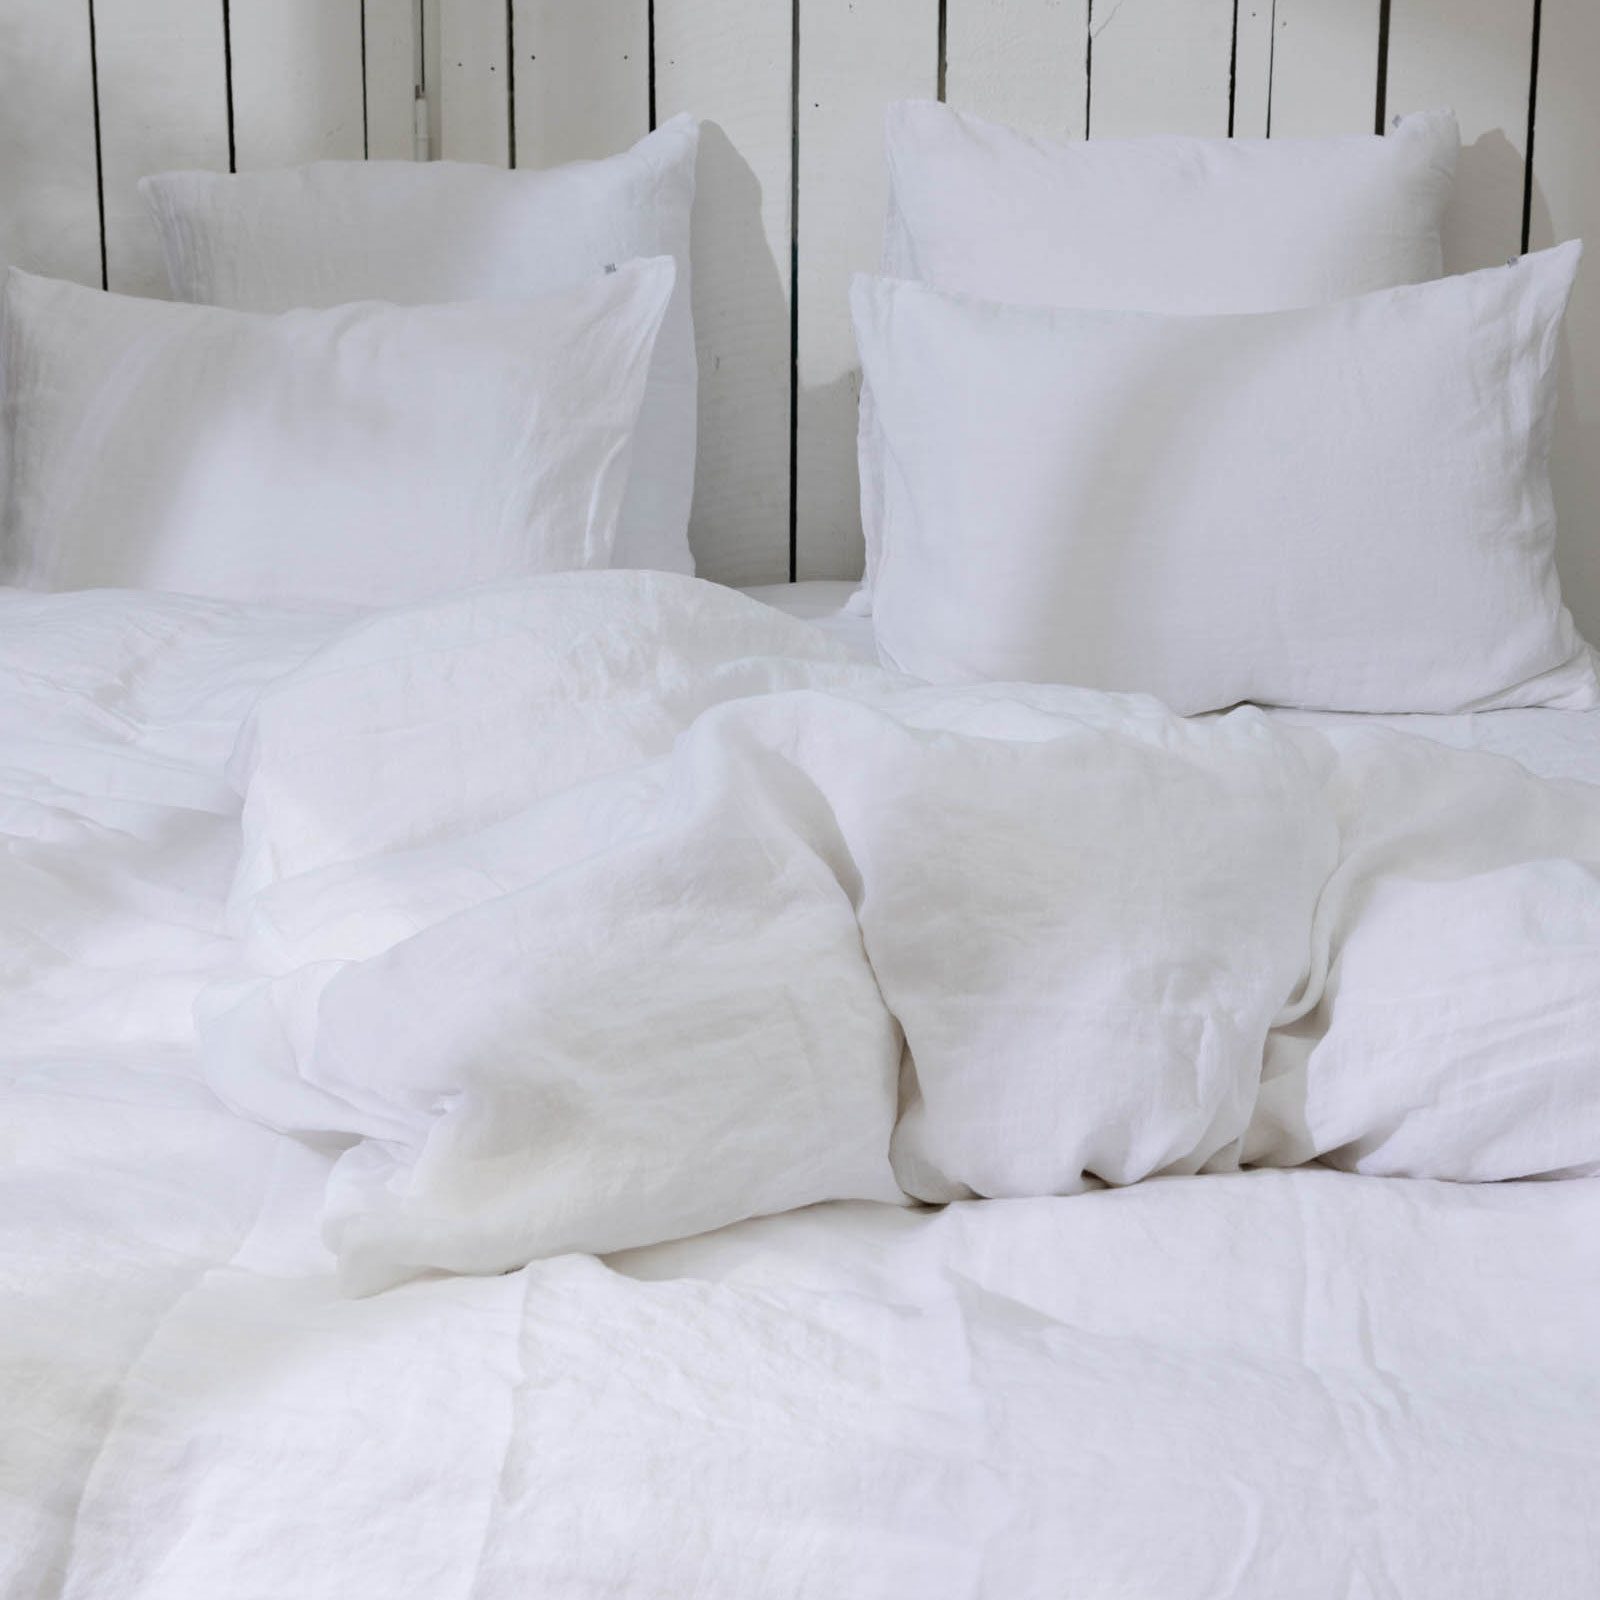 stone-washed-linen-duvet-cover-snow-white-4